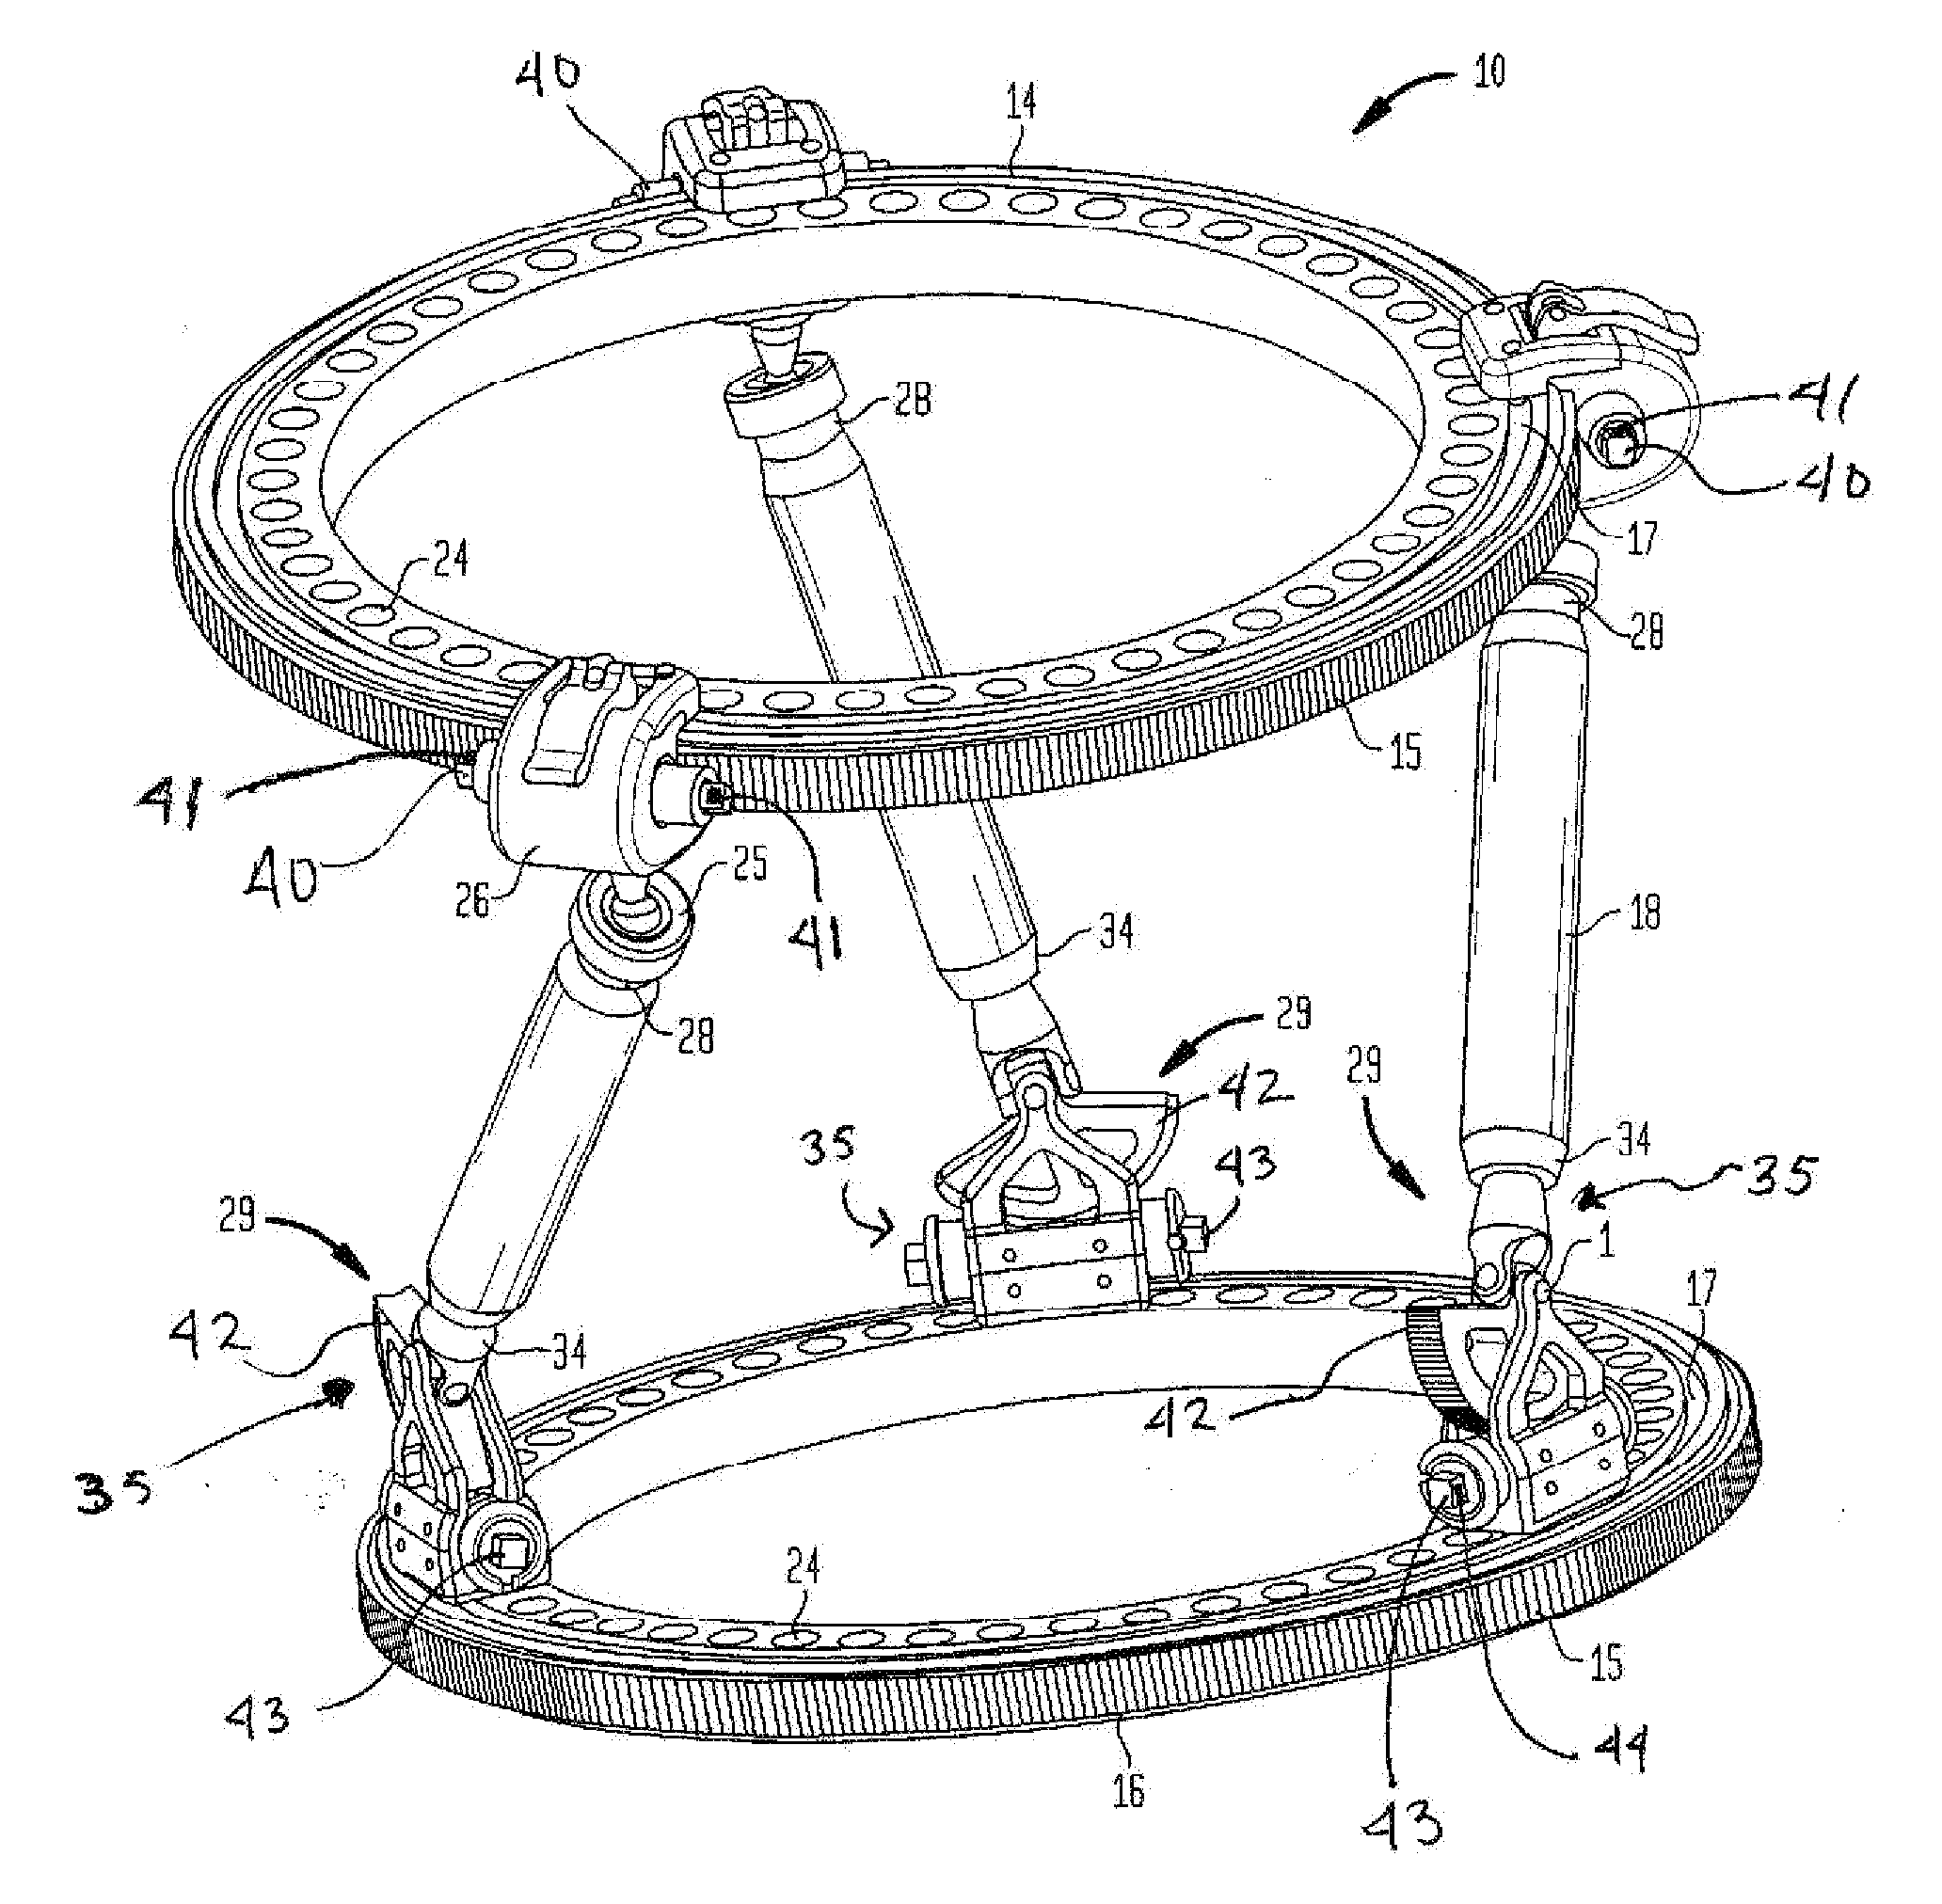 Methods and systems for adjusting an external fixation frame